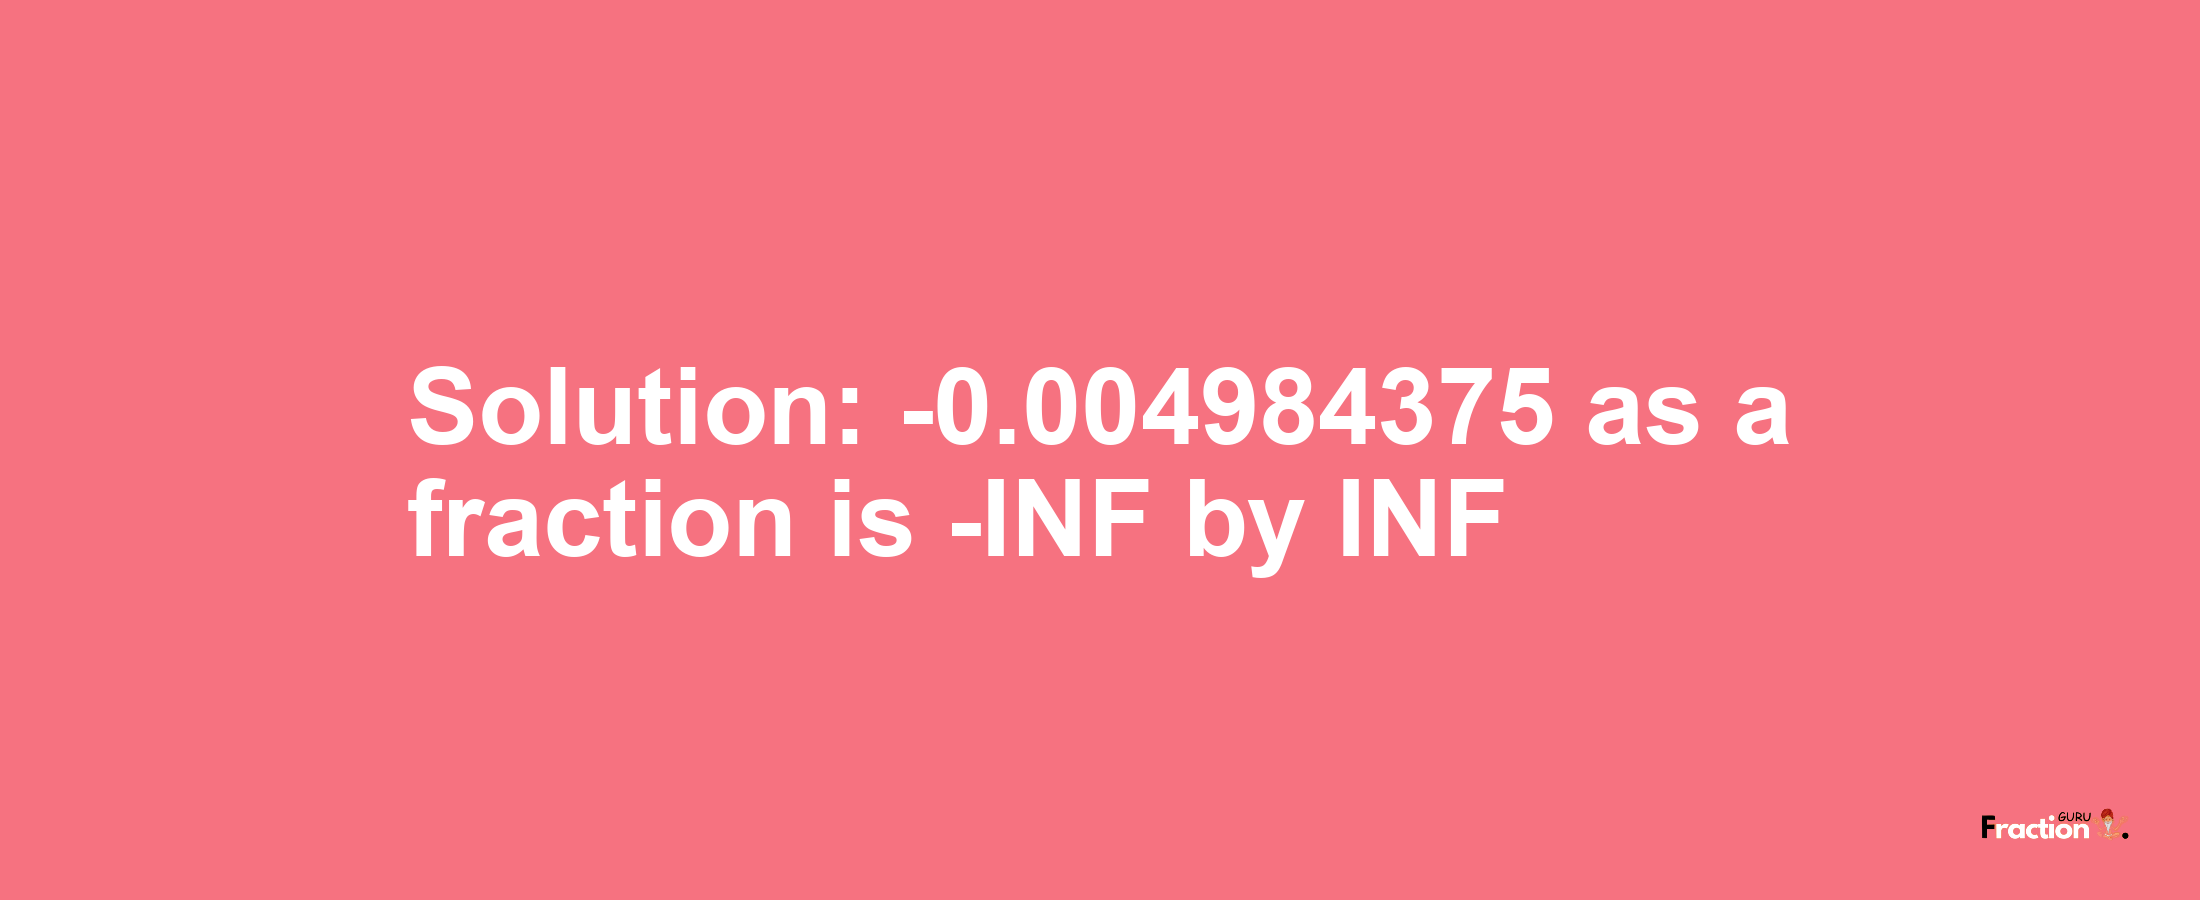 Solution:-0.004984375 as a fraction is -INF/INF